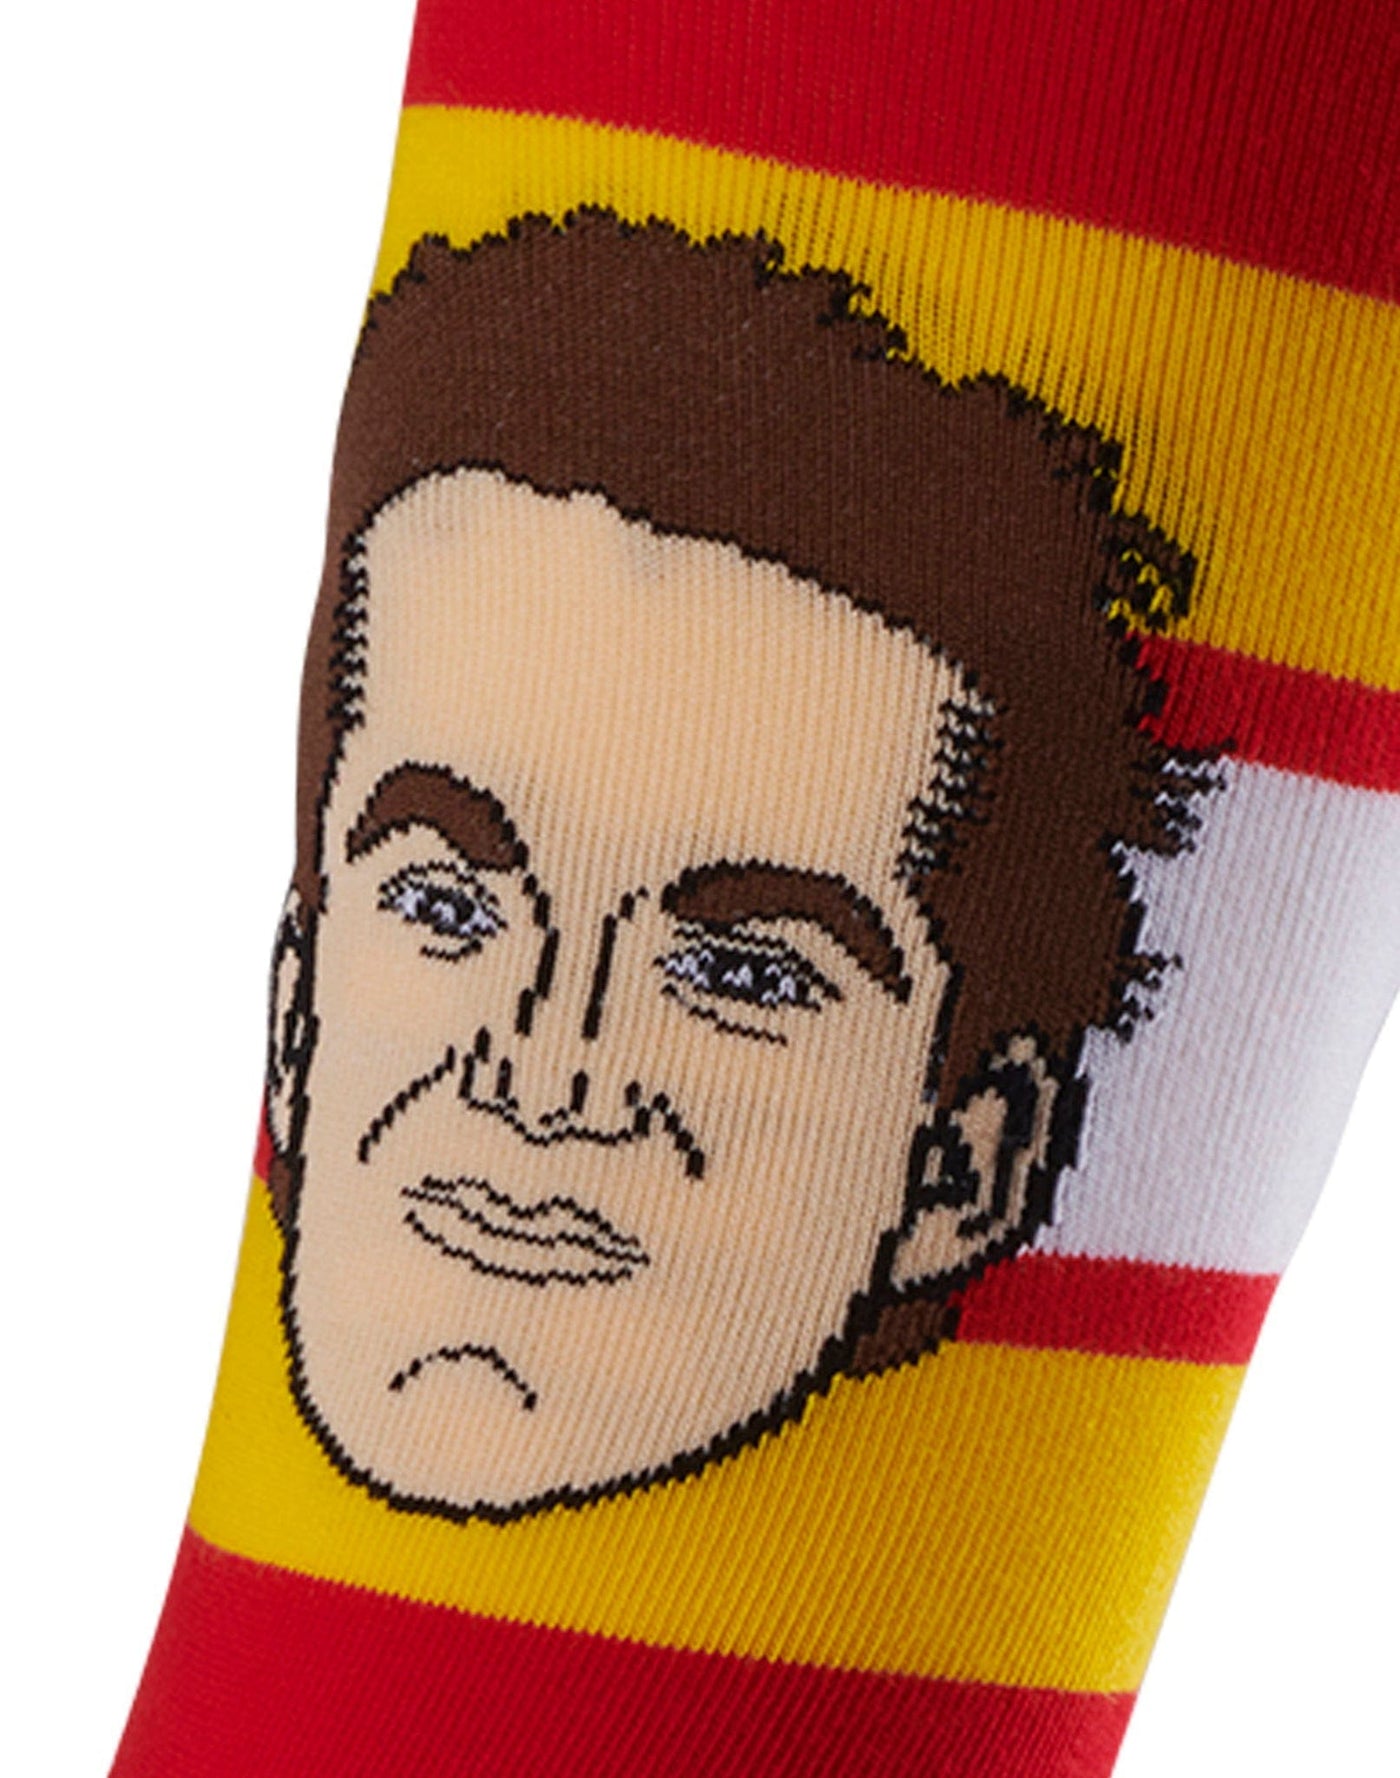 Florida Panthers Major League Socks - The Hockey Shop Source For Sports